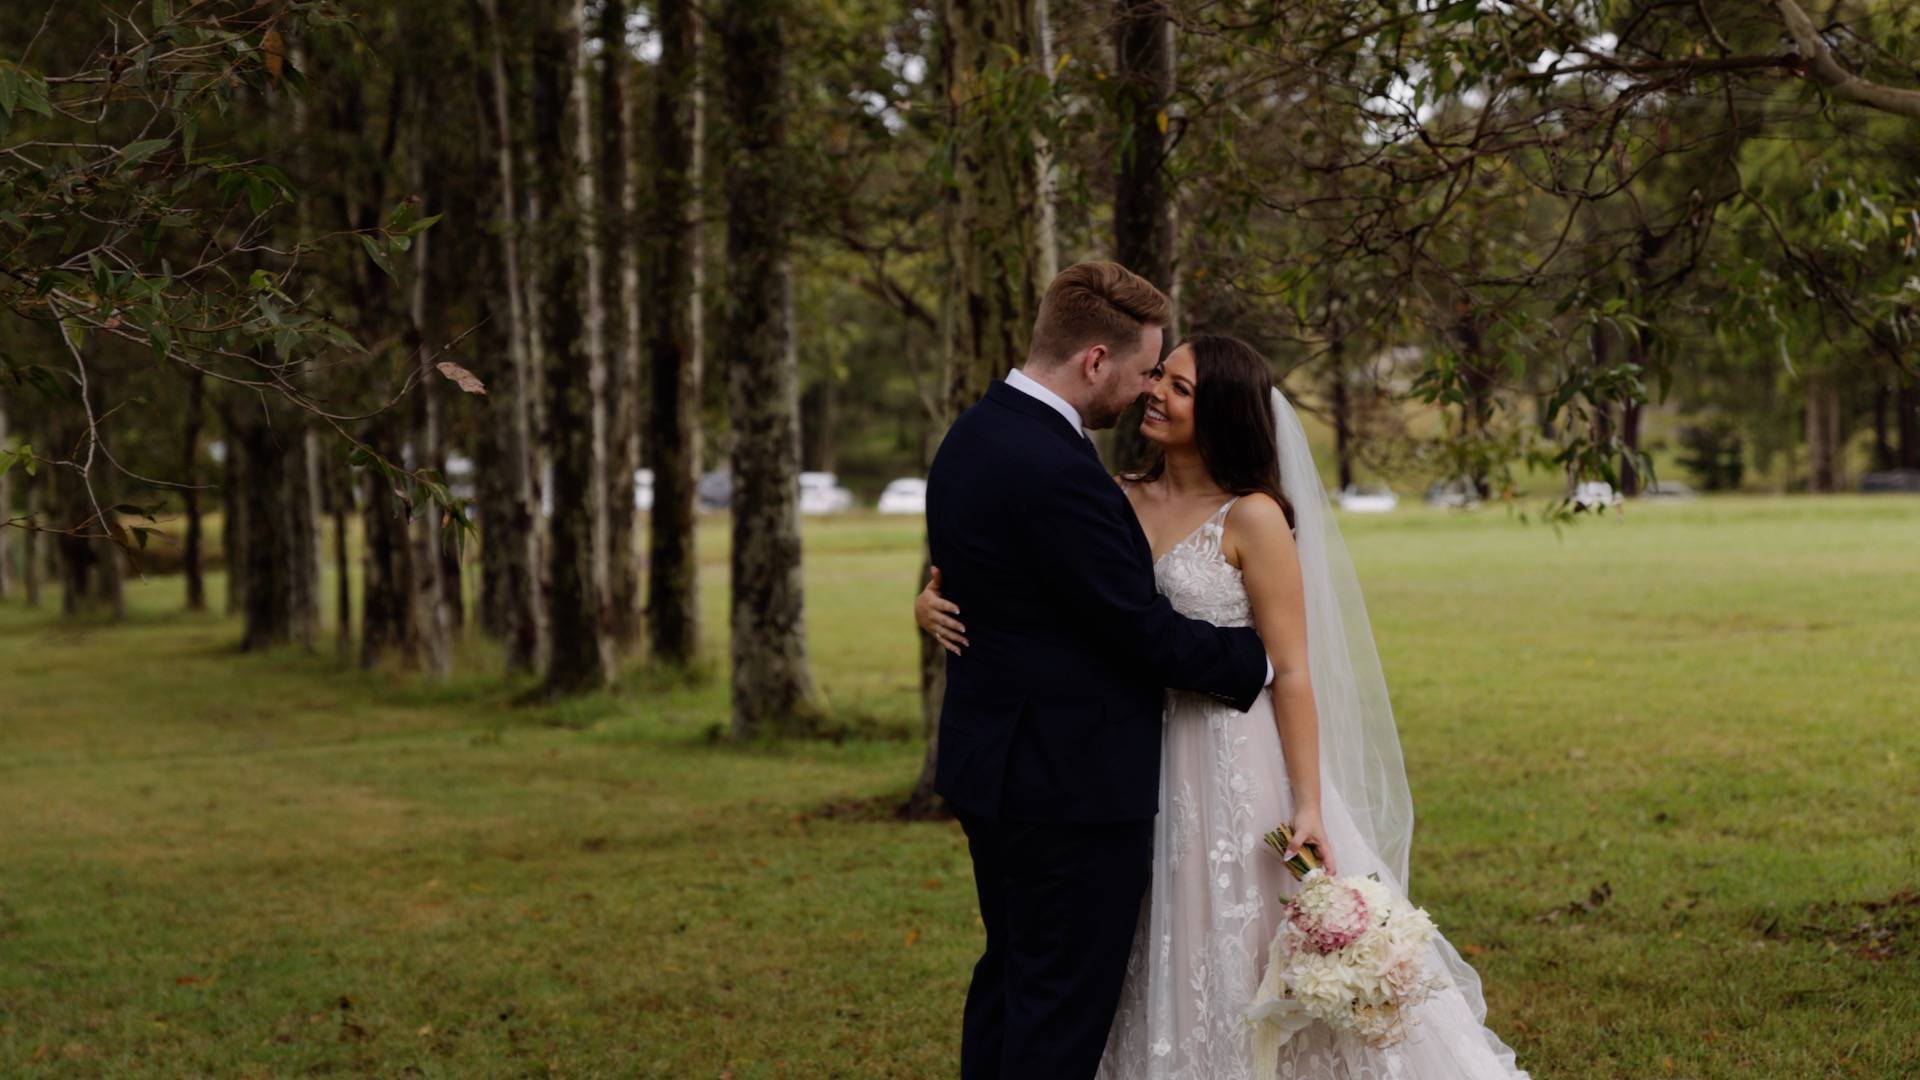 Newly married walking in a sunny orchard - photographer and wedding videographer Nowra - Lovereel